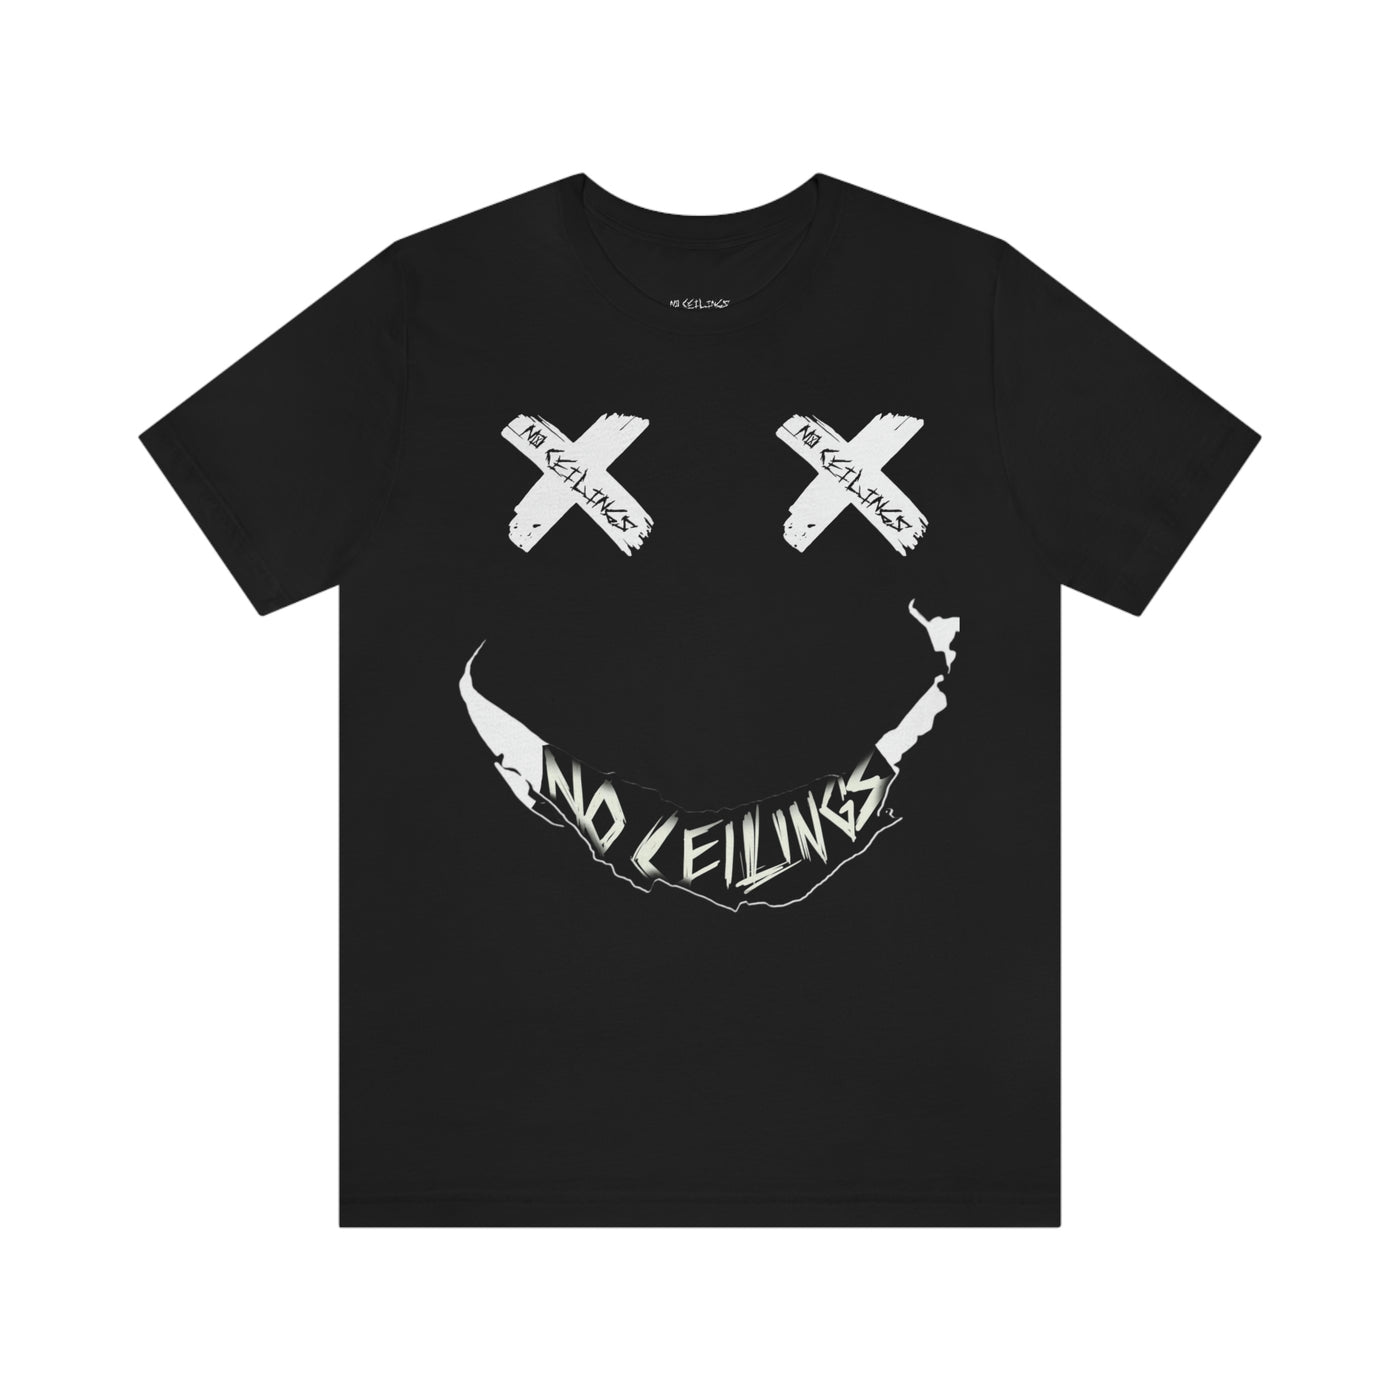 Smile in Blk/Wht Jersey Short Sleeve Tee - NoCeilingsClothing